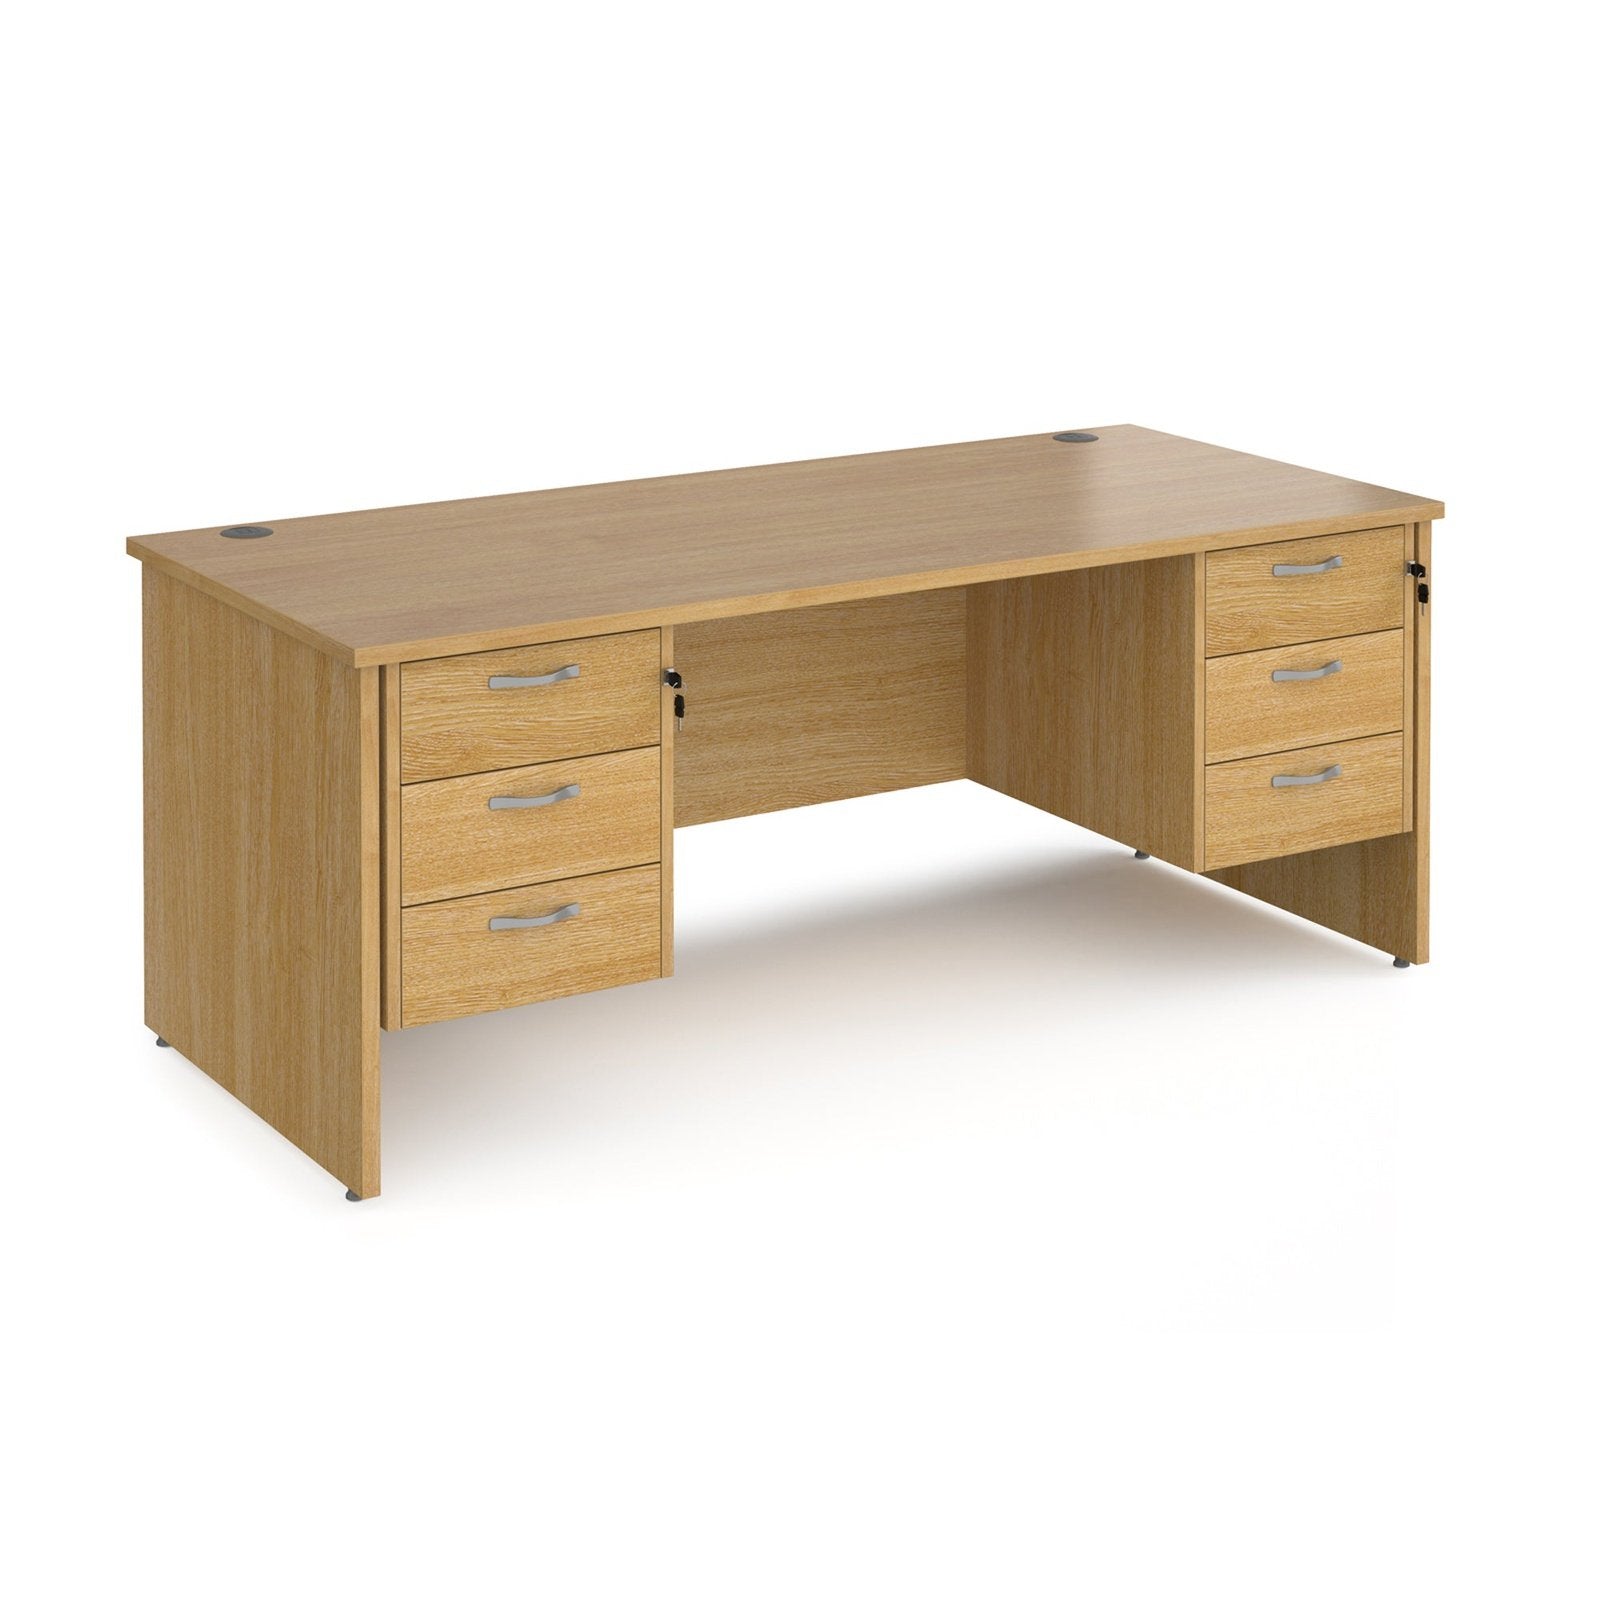 Maestro 25 panel leg straight desk 800 deep with two x 3 drawer pedestals - Office Products Online